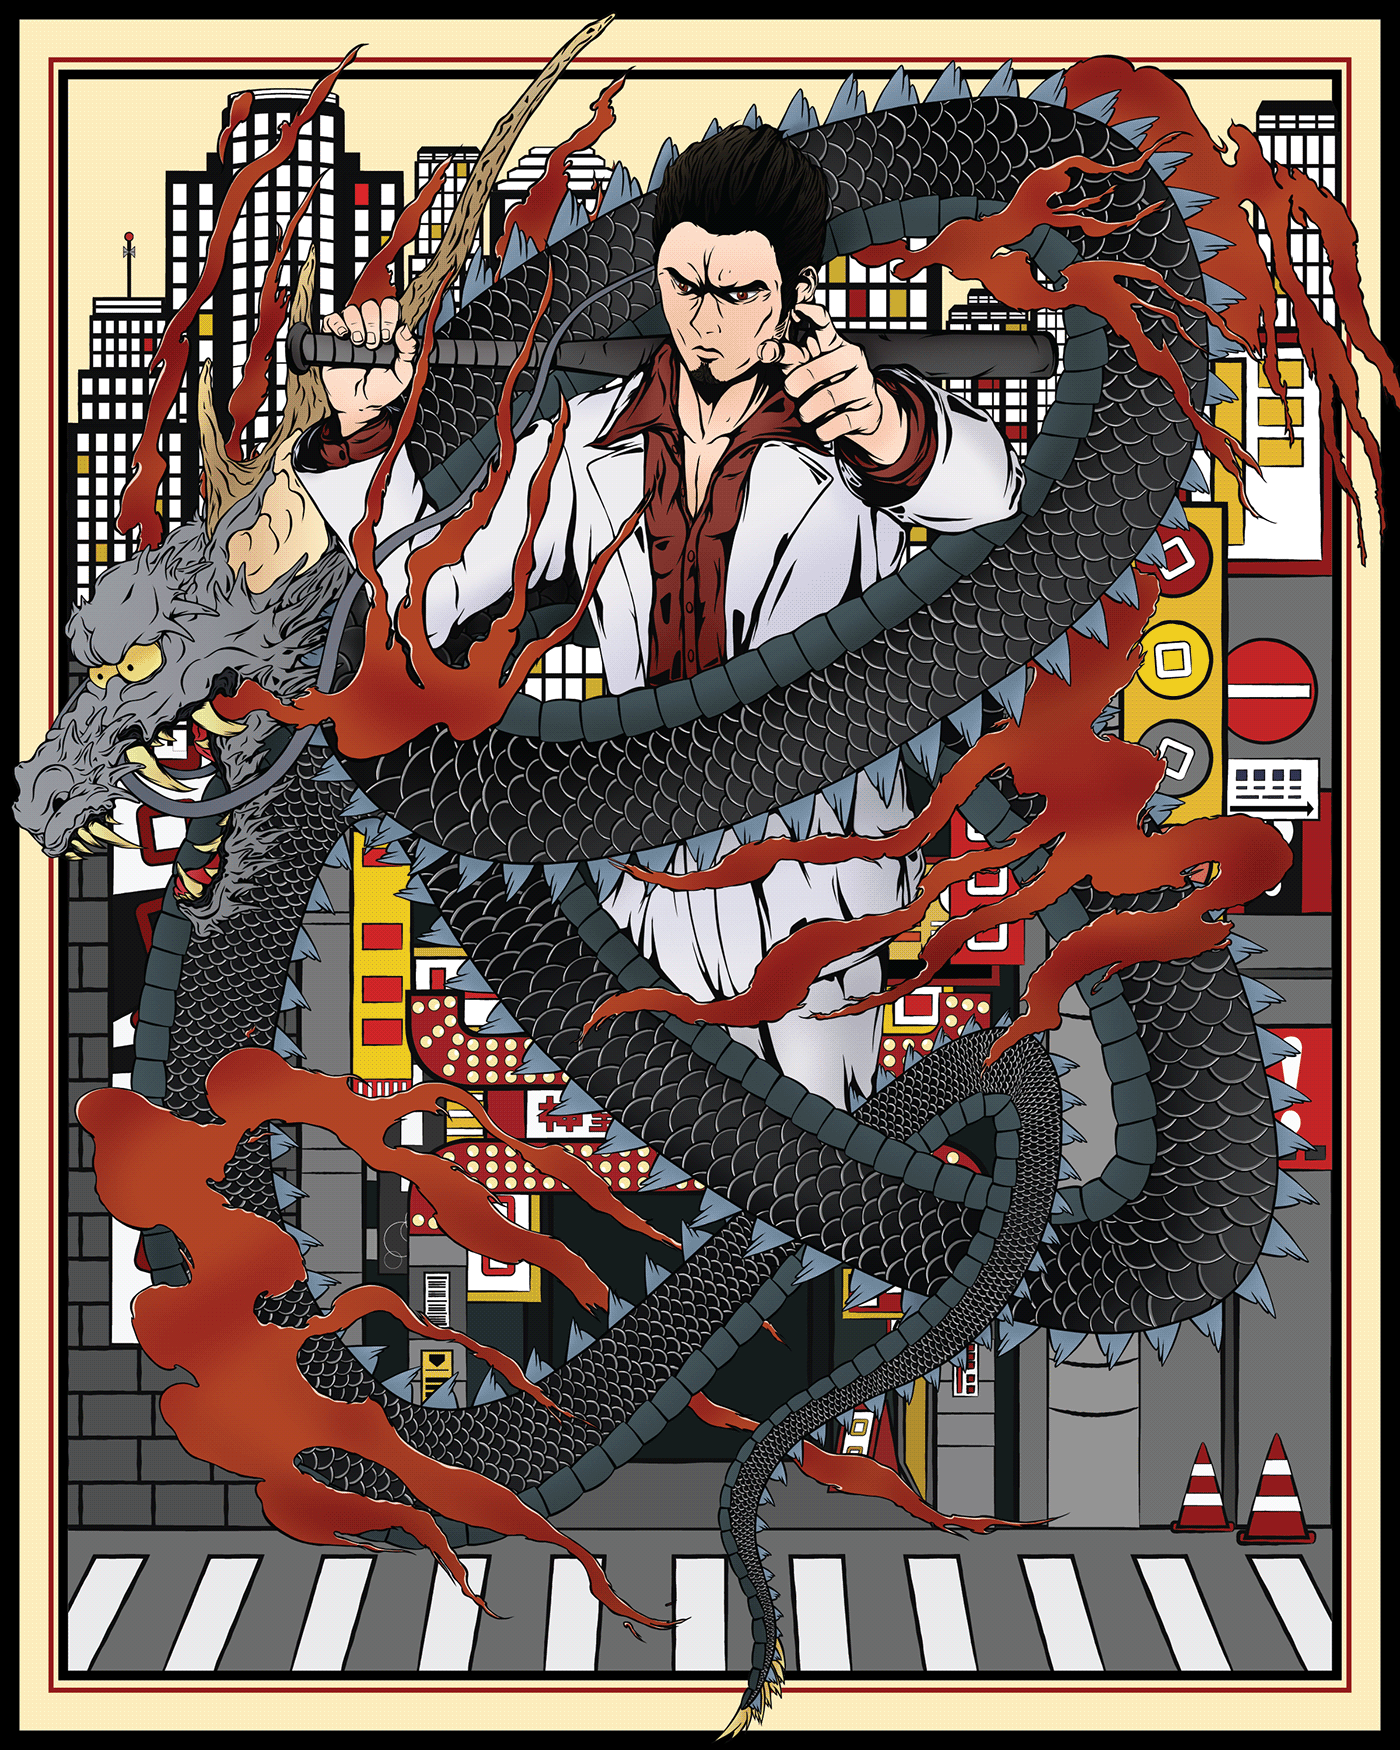 Featured art piece in Sega's Official Yakuza 6 Art Gallery and Art Book